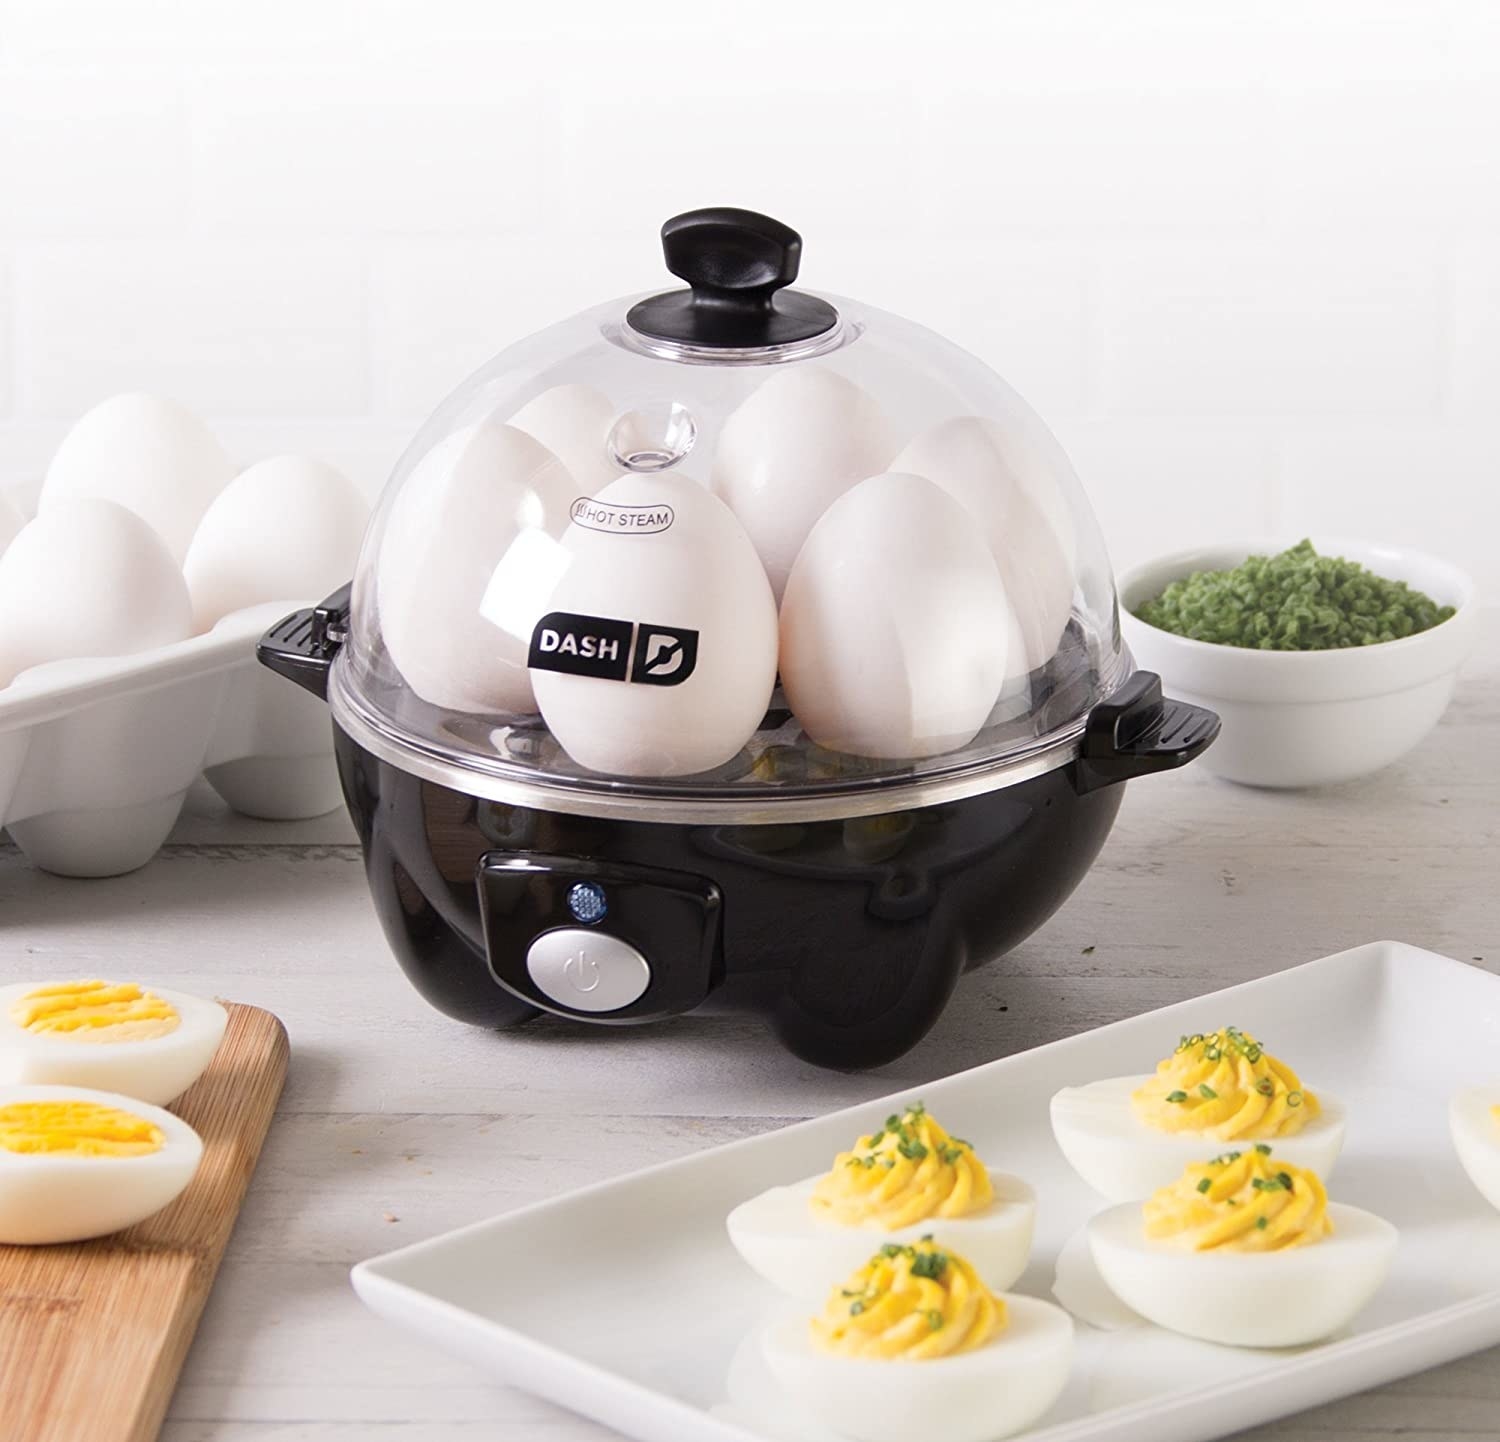 The egg cooker surrounded by devilled eggs